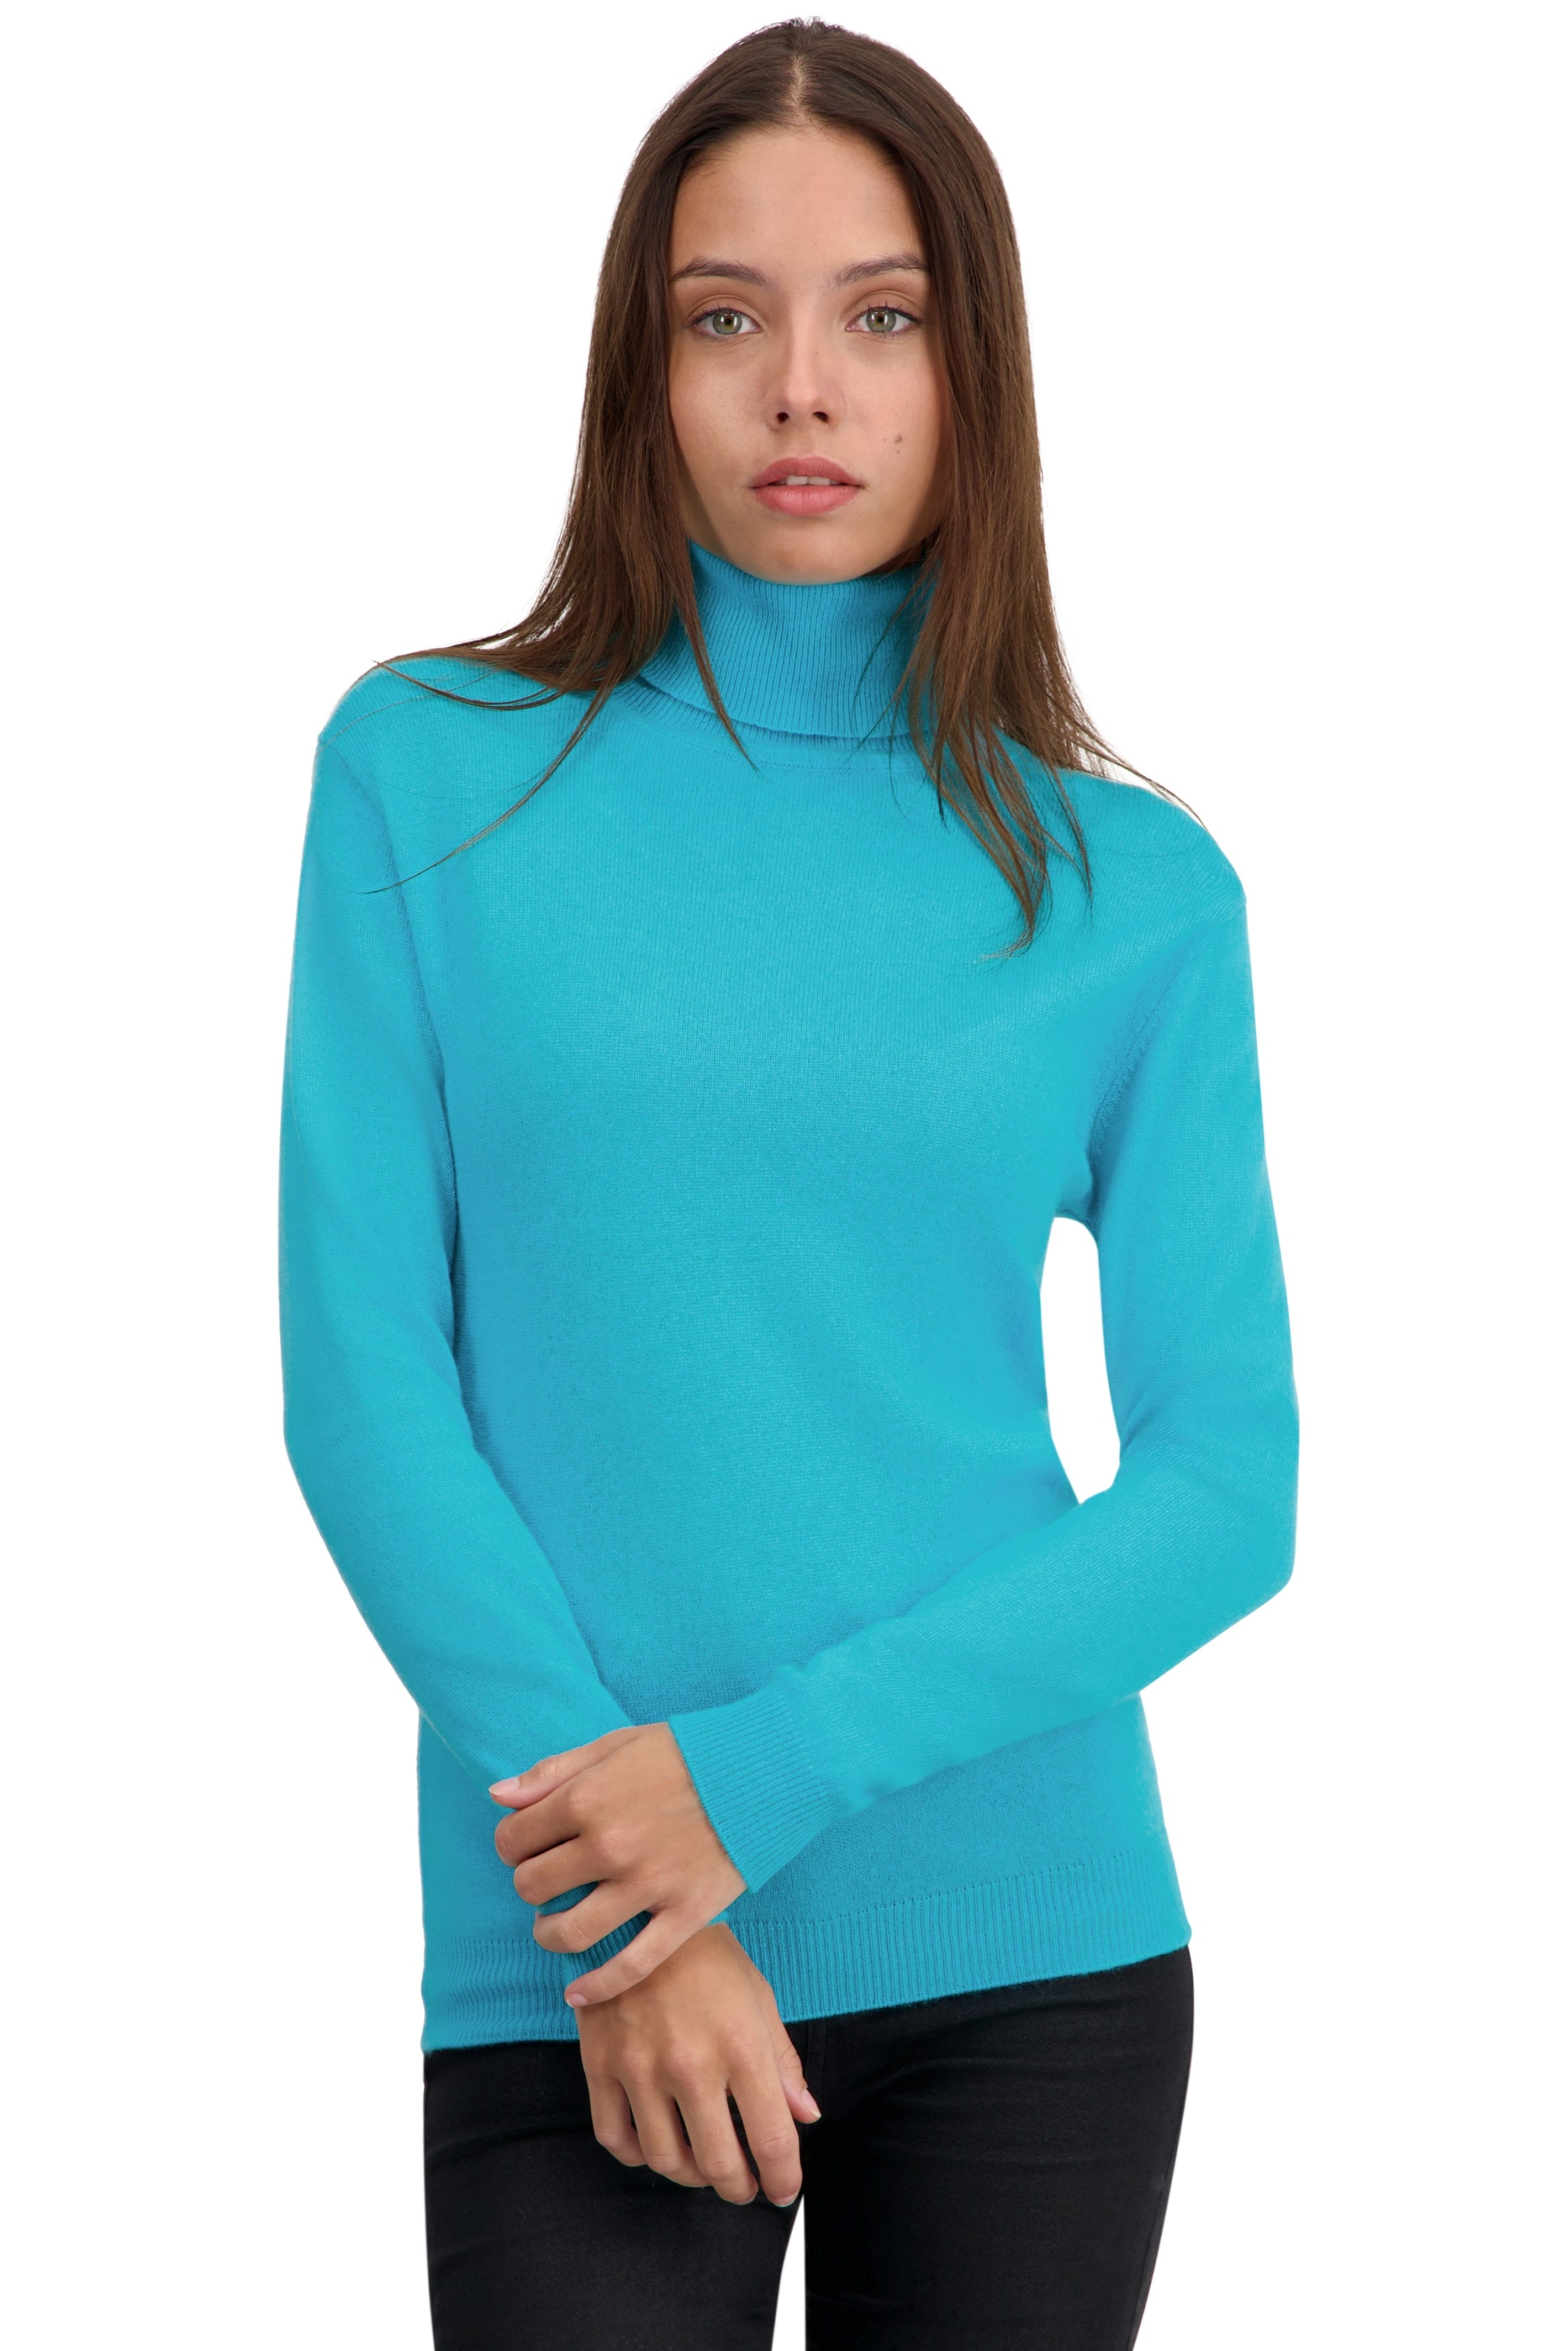 Cashmere ladies basic sweaters at low prices tale first kingfisher m